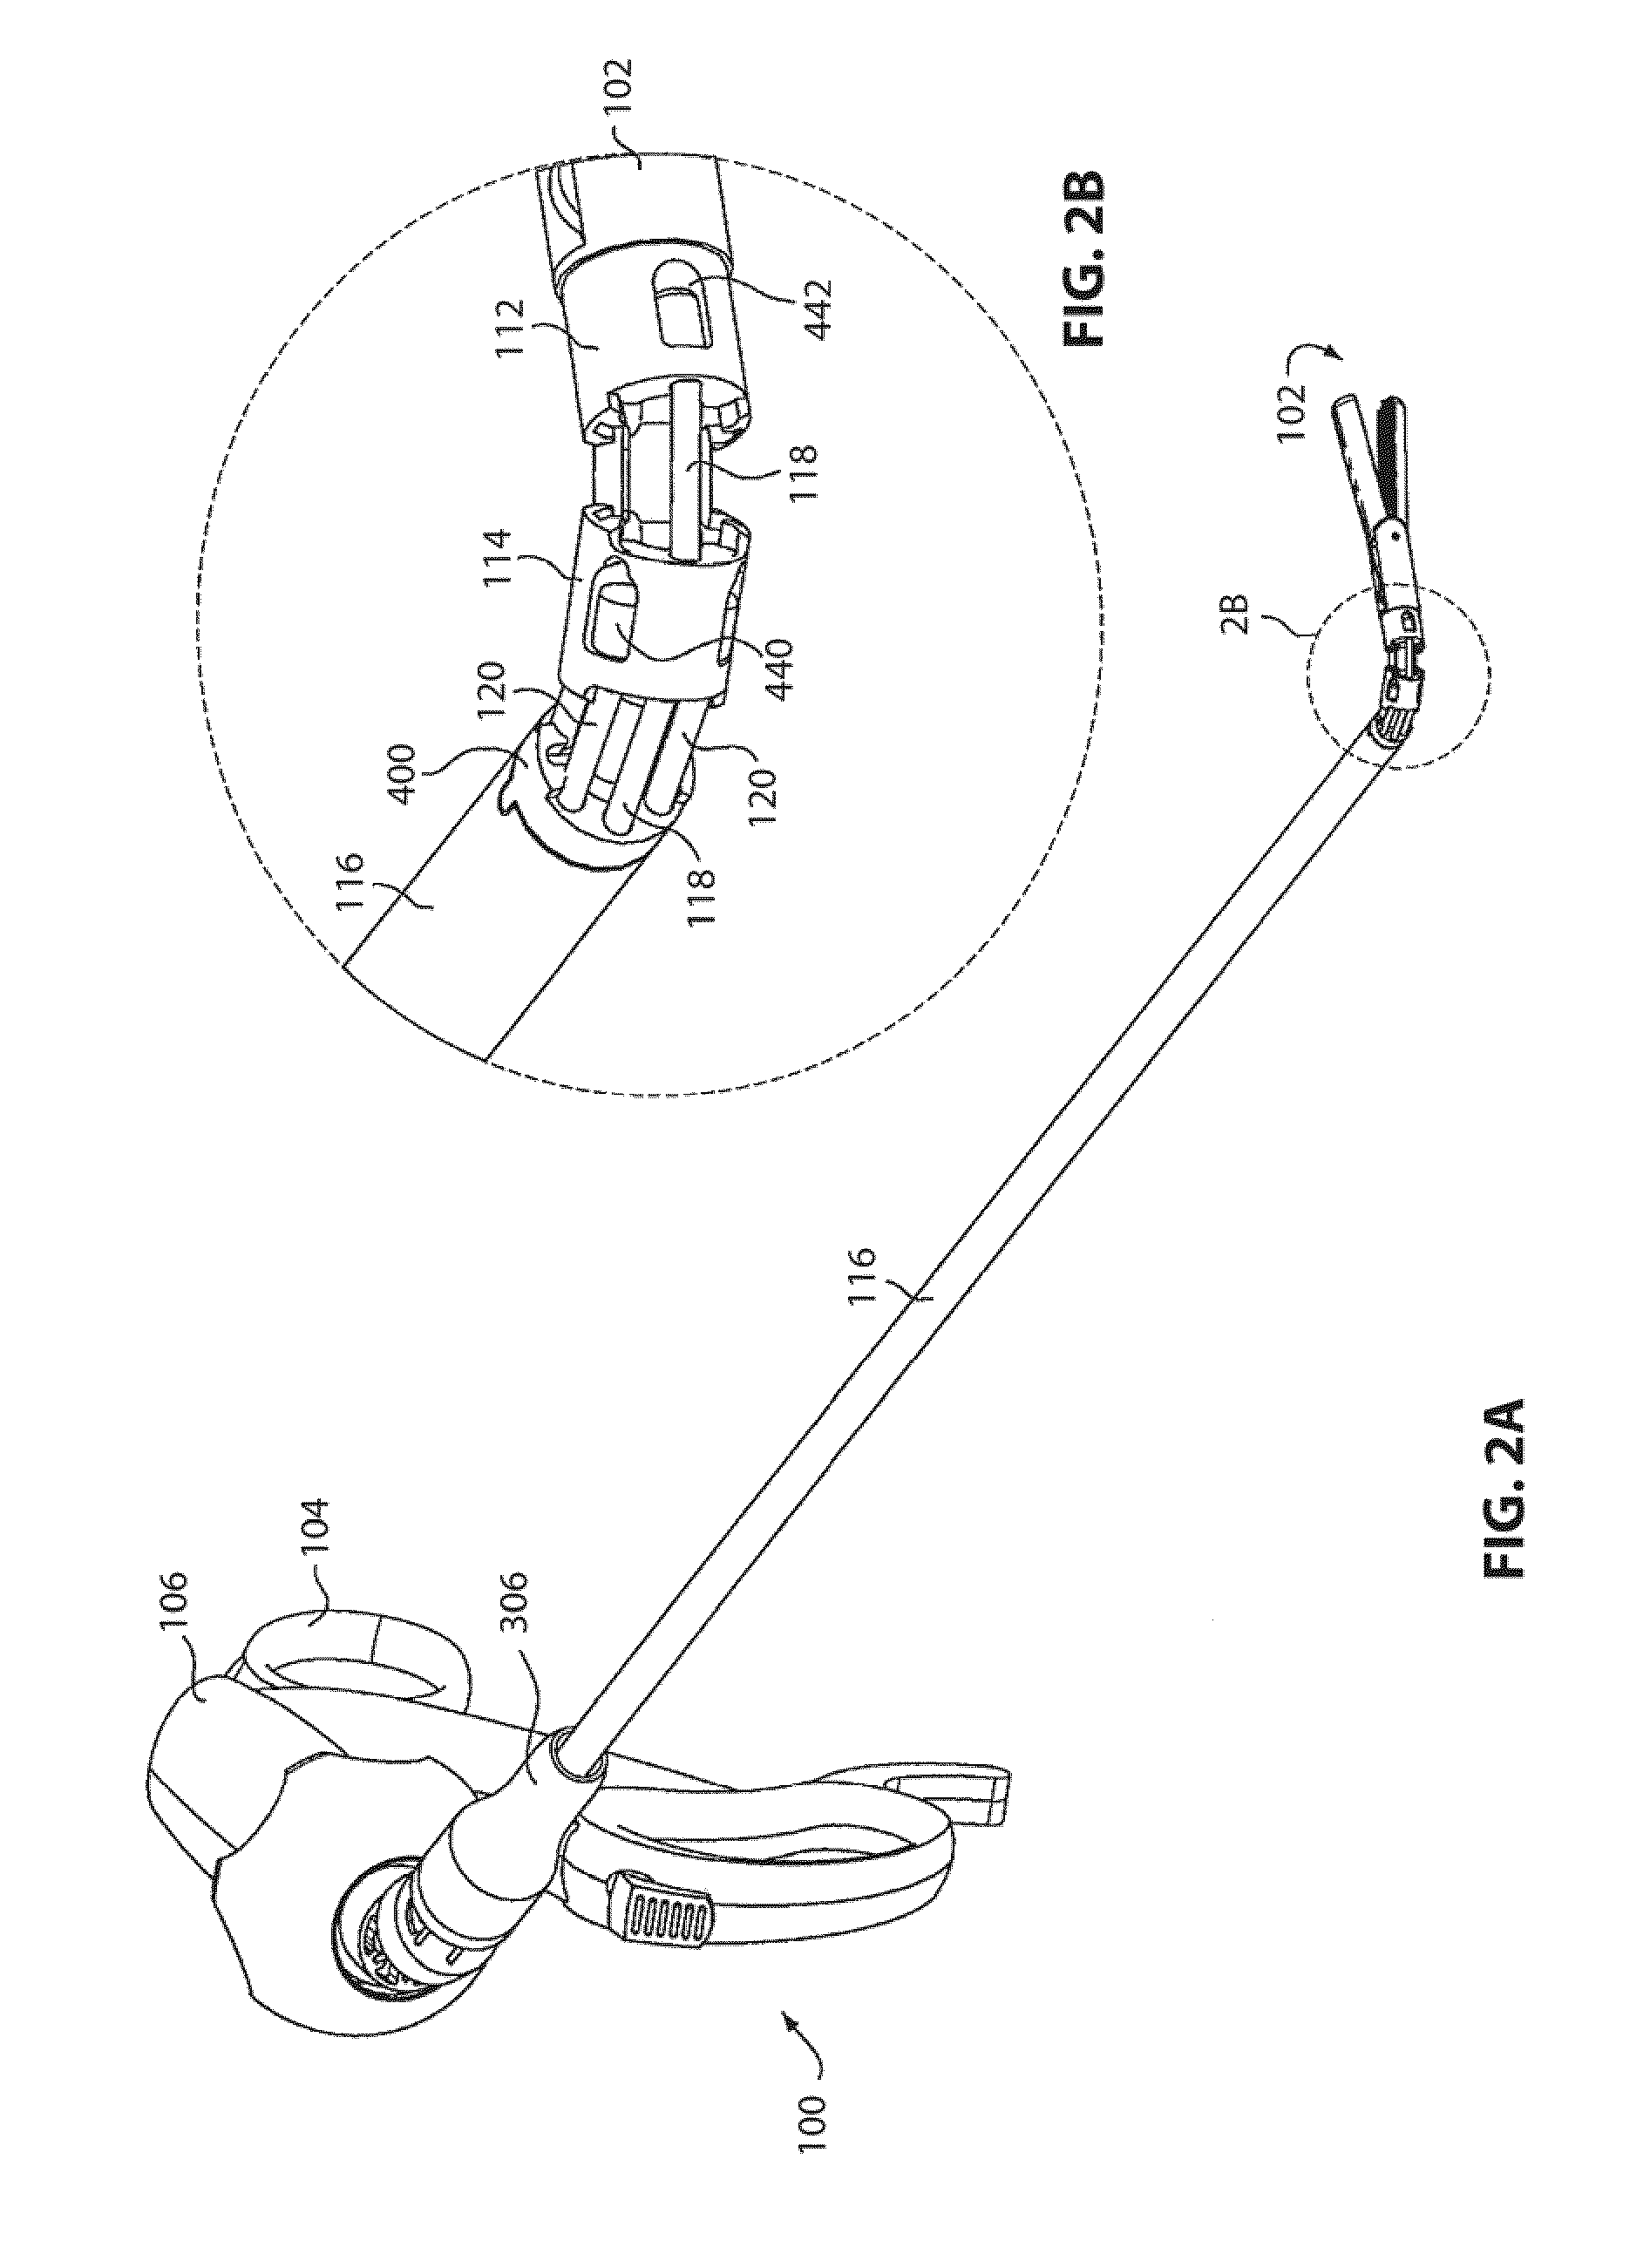 Instrument with multiple articulation locks